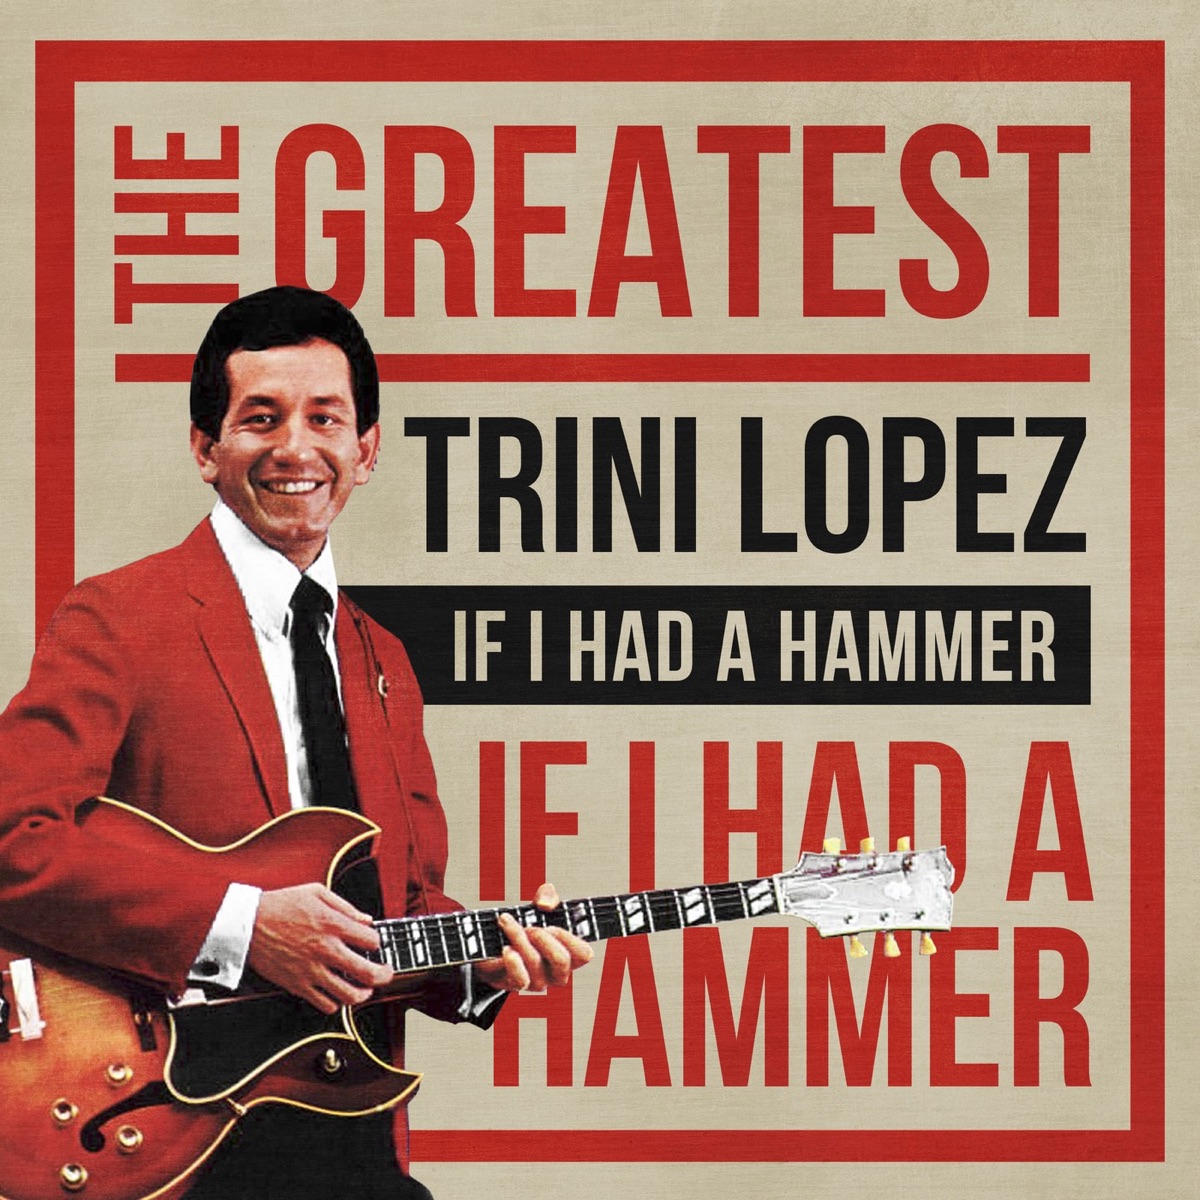 If I Had a Hammer: The Greatest by Trini Lopez on Apple Music